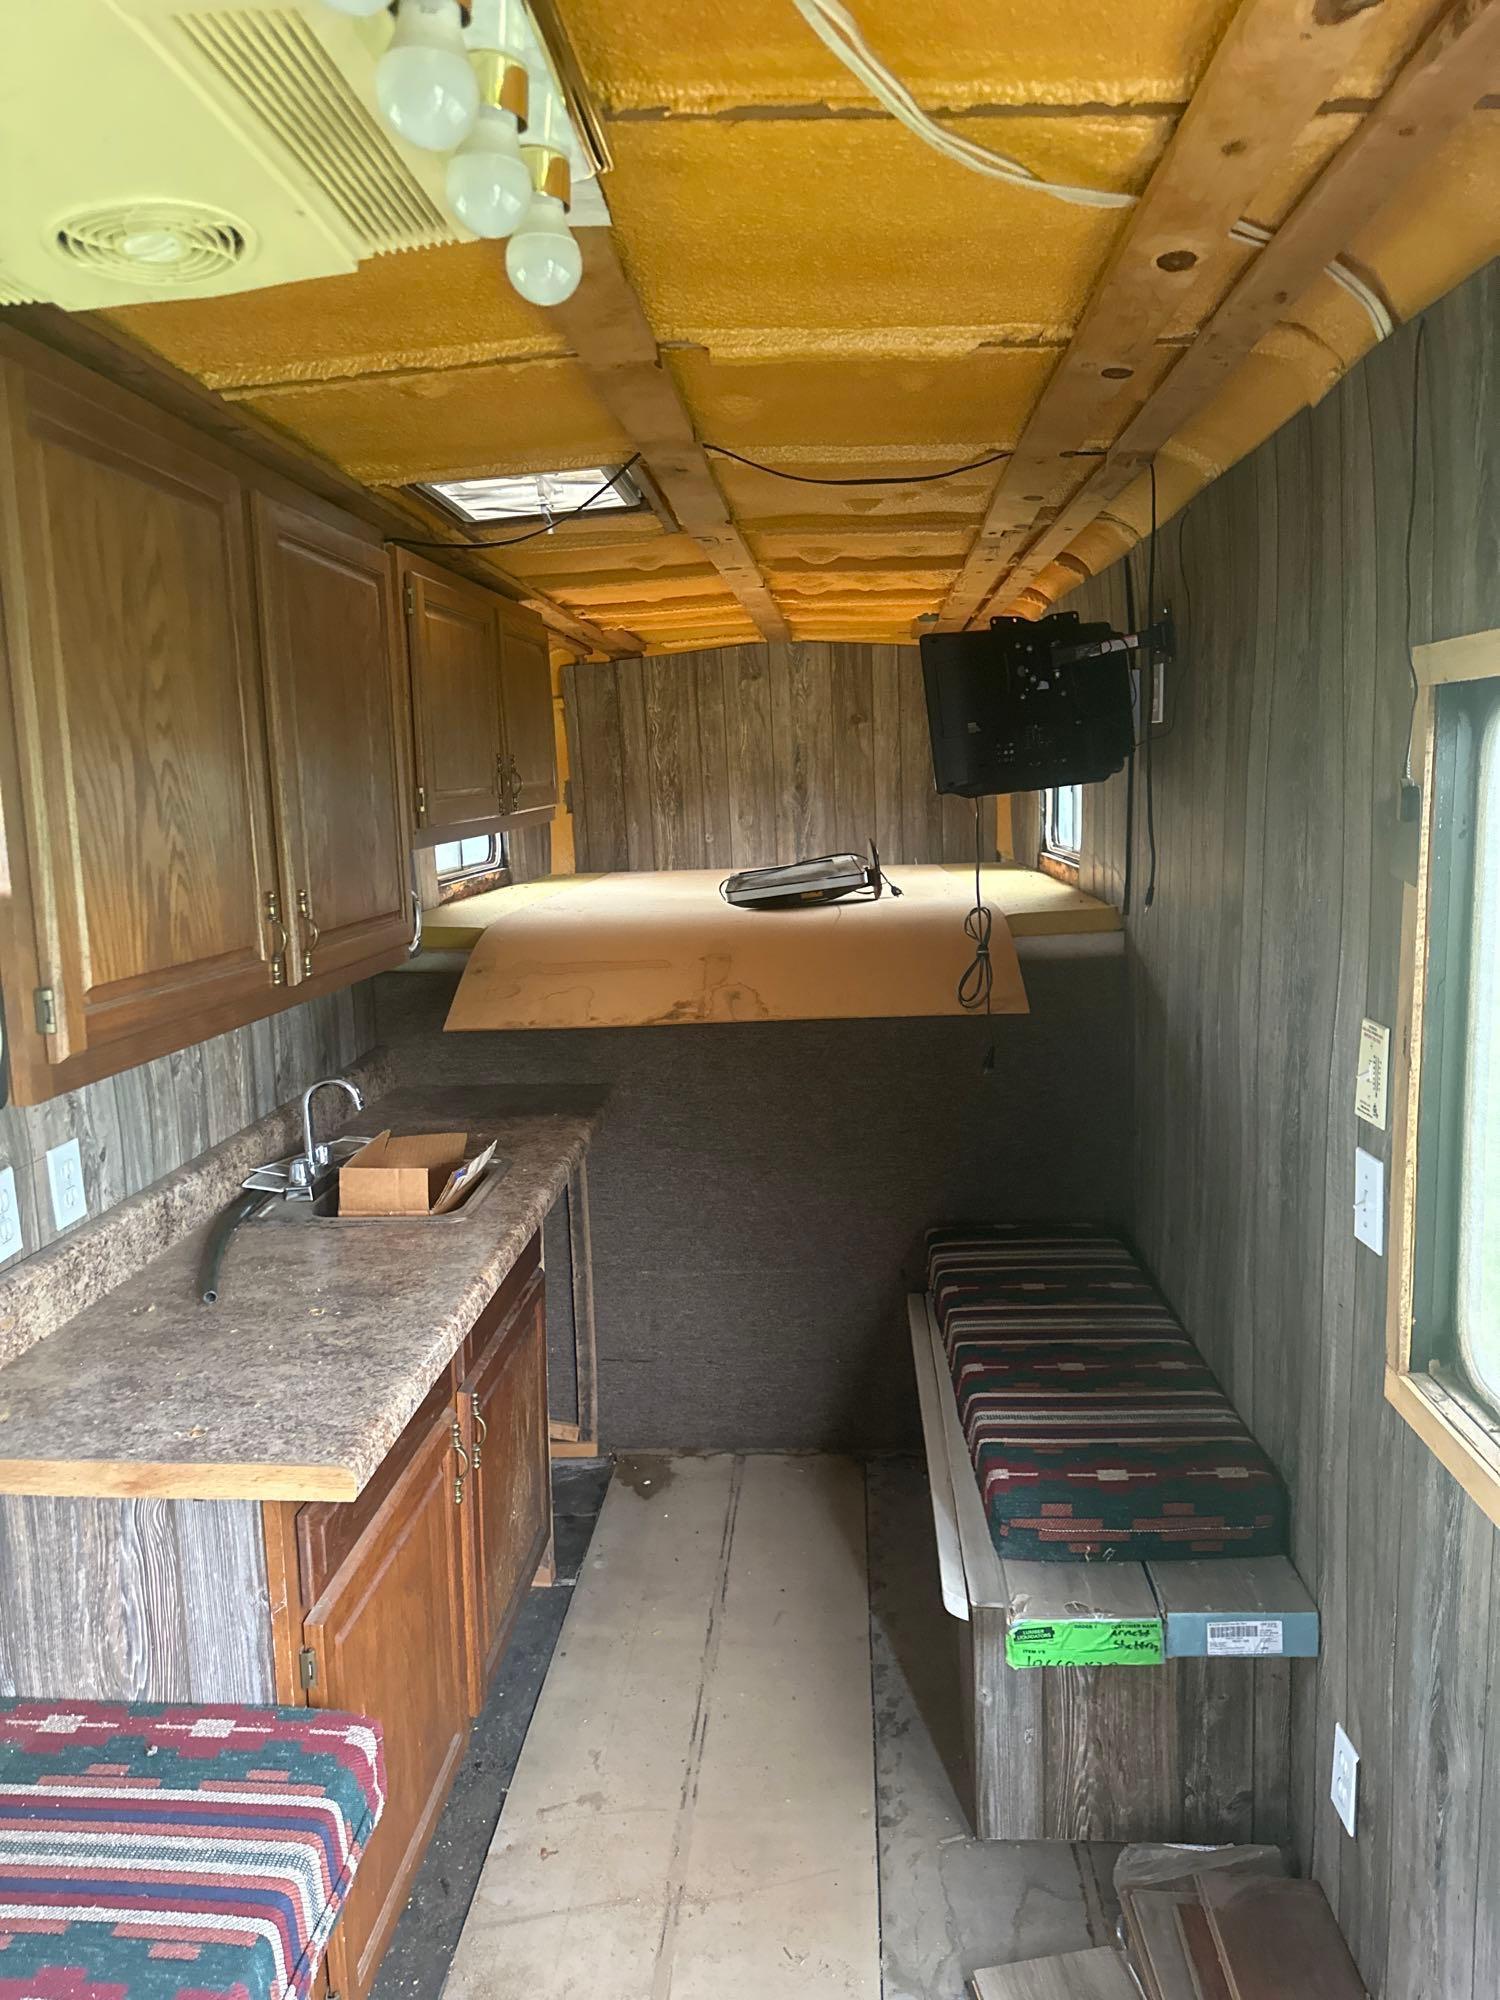 Horse trailer - Bill of sale only